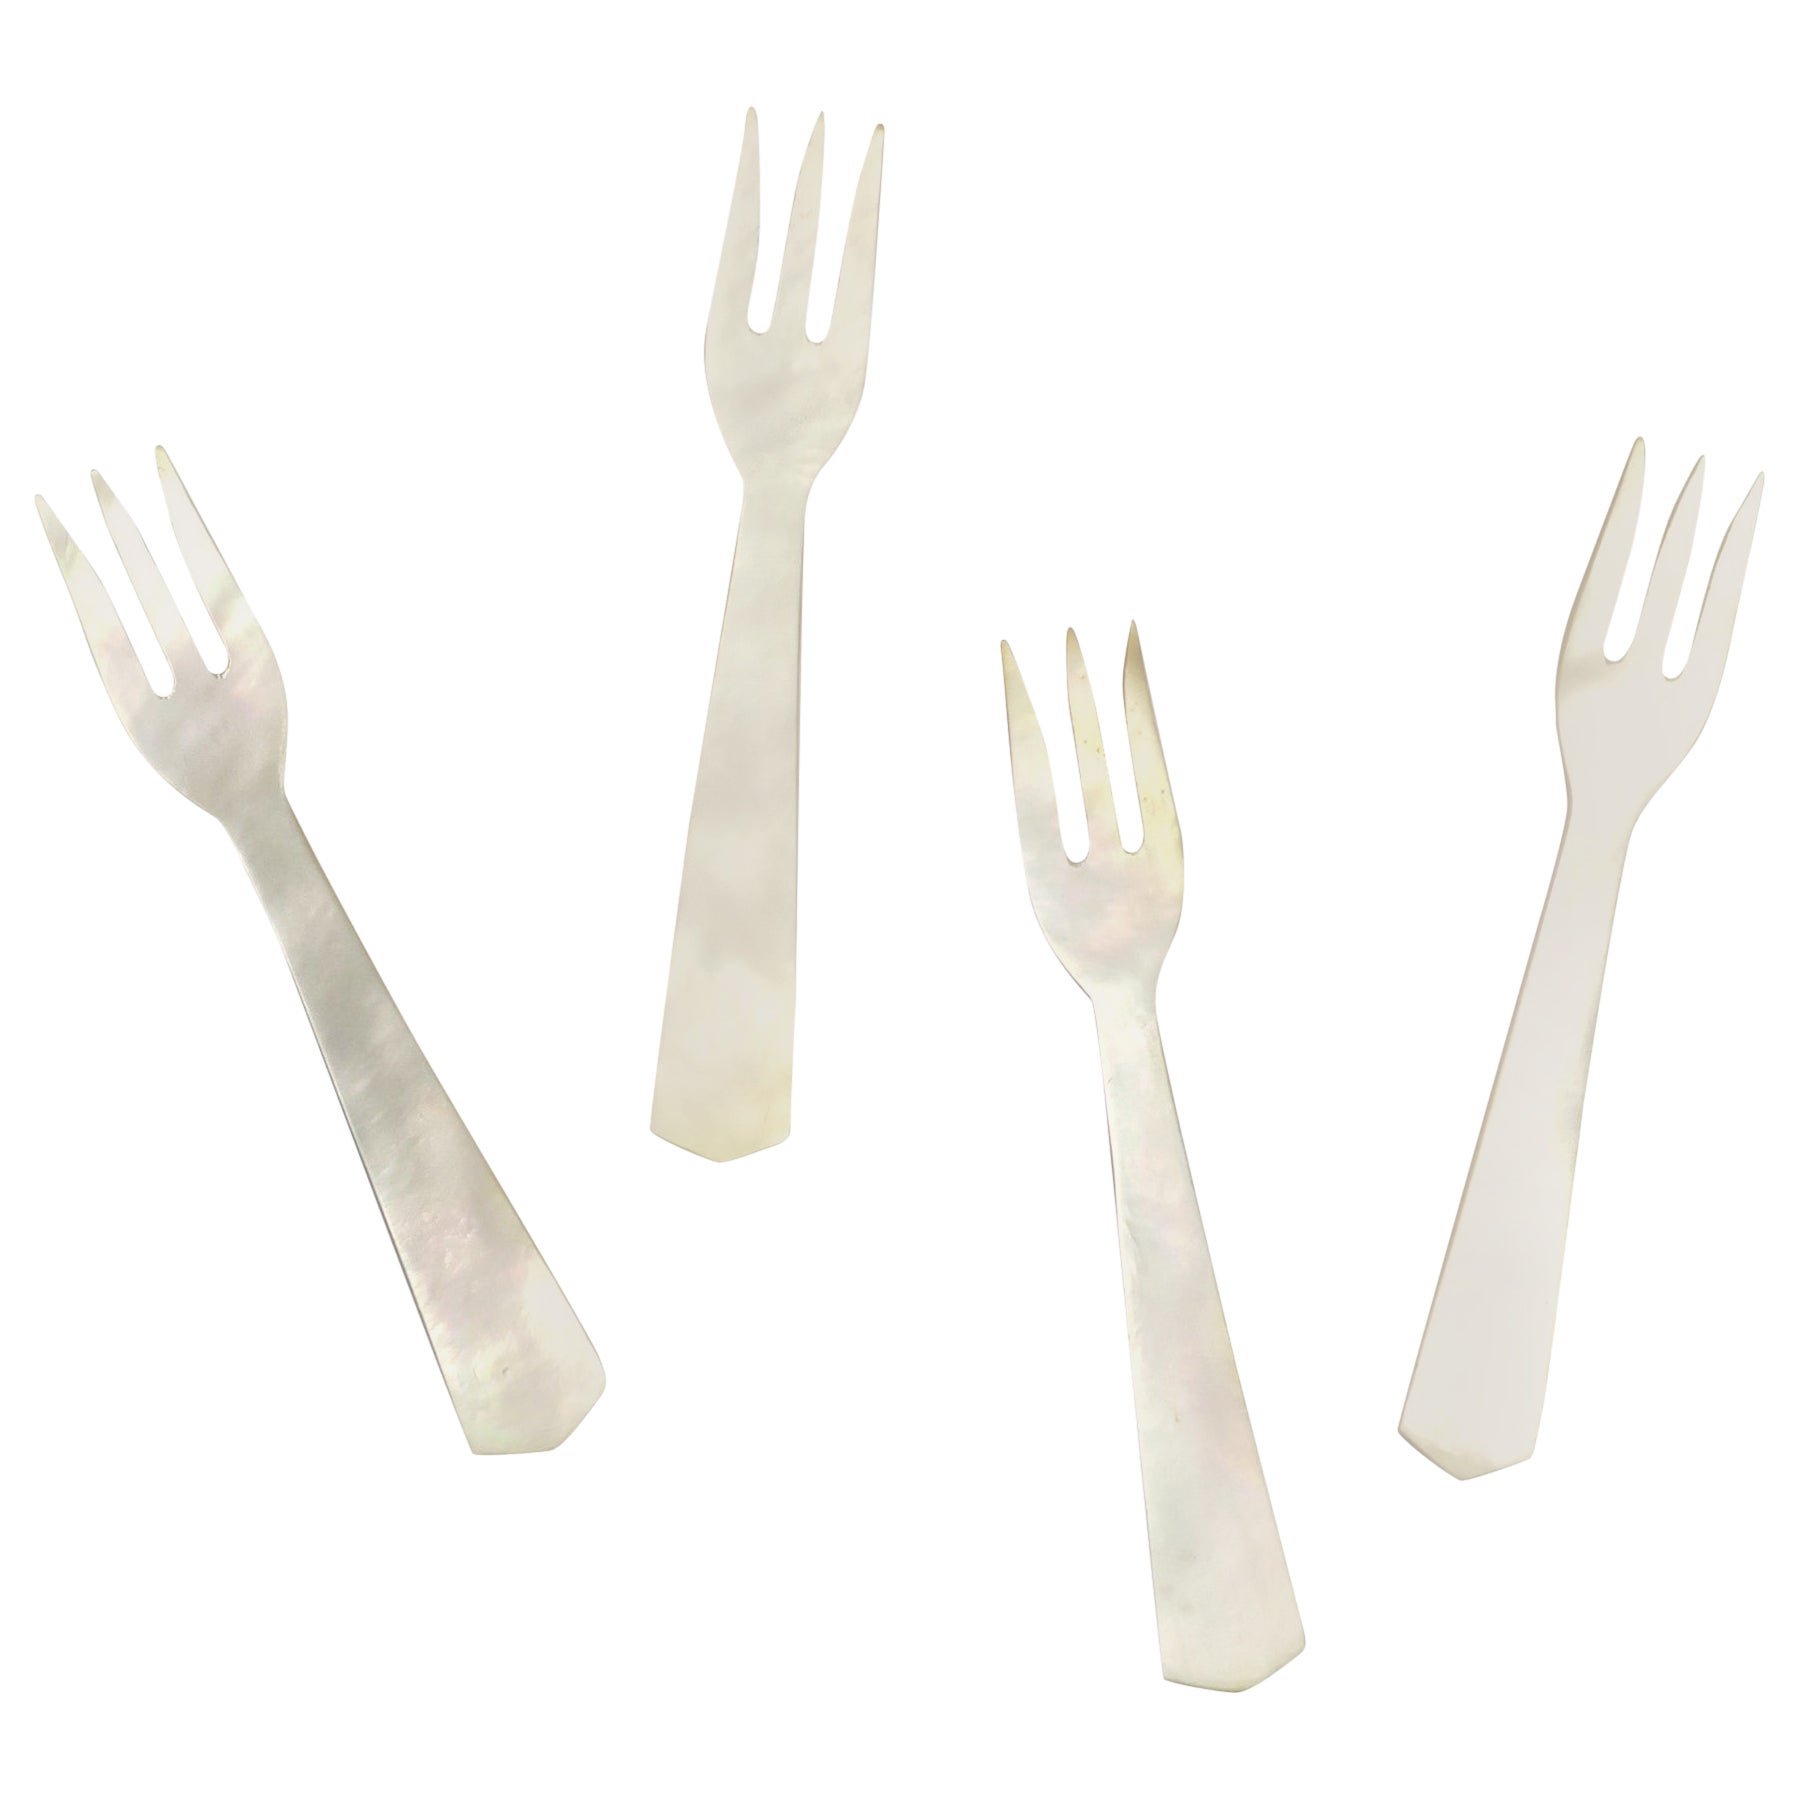 Mother of Pearl Appetizer or Caviar Forks, Set of 4